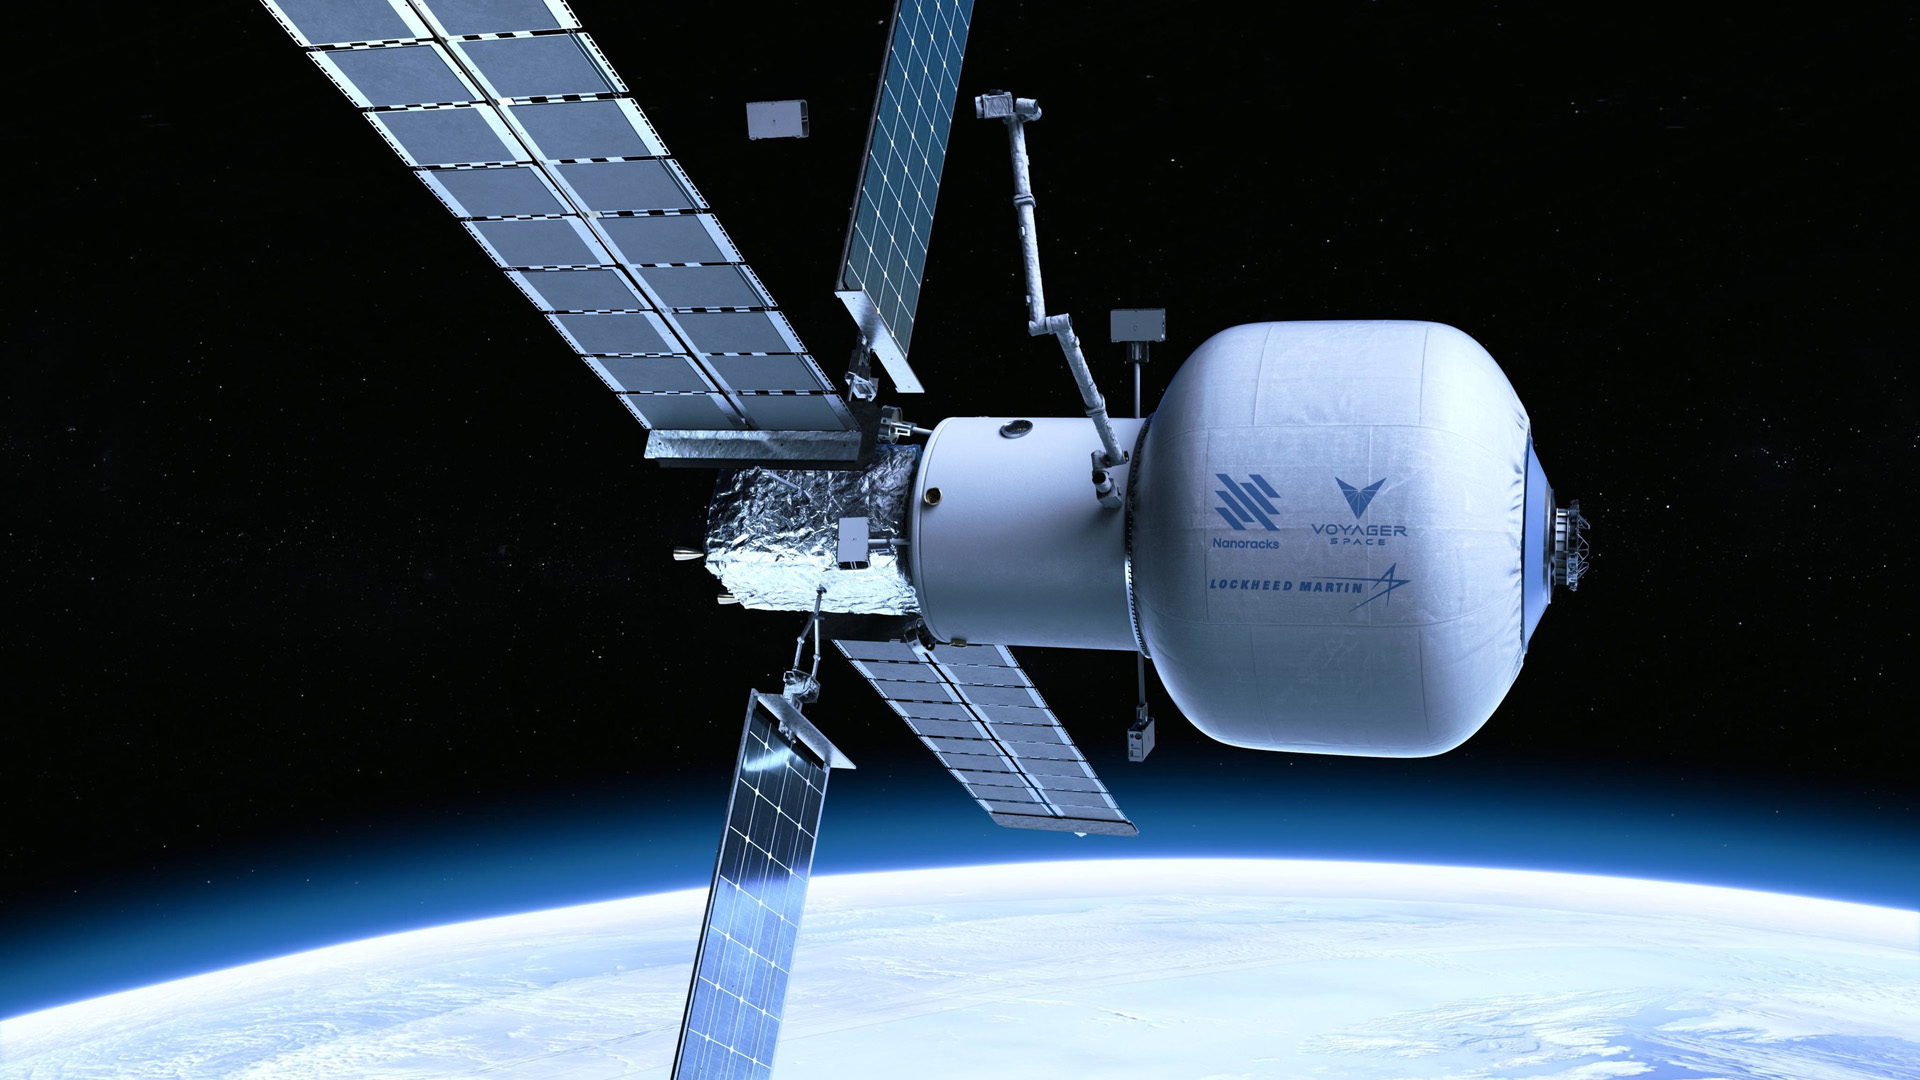 An artist's illustration of the Starlab private space station, a joint project of the companies Nanoracks, Lockheed Martin and Voyager Space. Starlab will be operational by 2027, if all goes according to plan. (Image credit: Nanoracks/Lockheed Martin/Voyager Space)